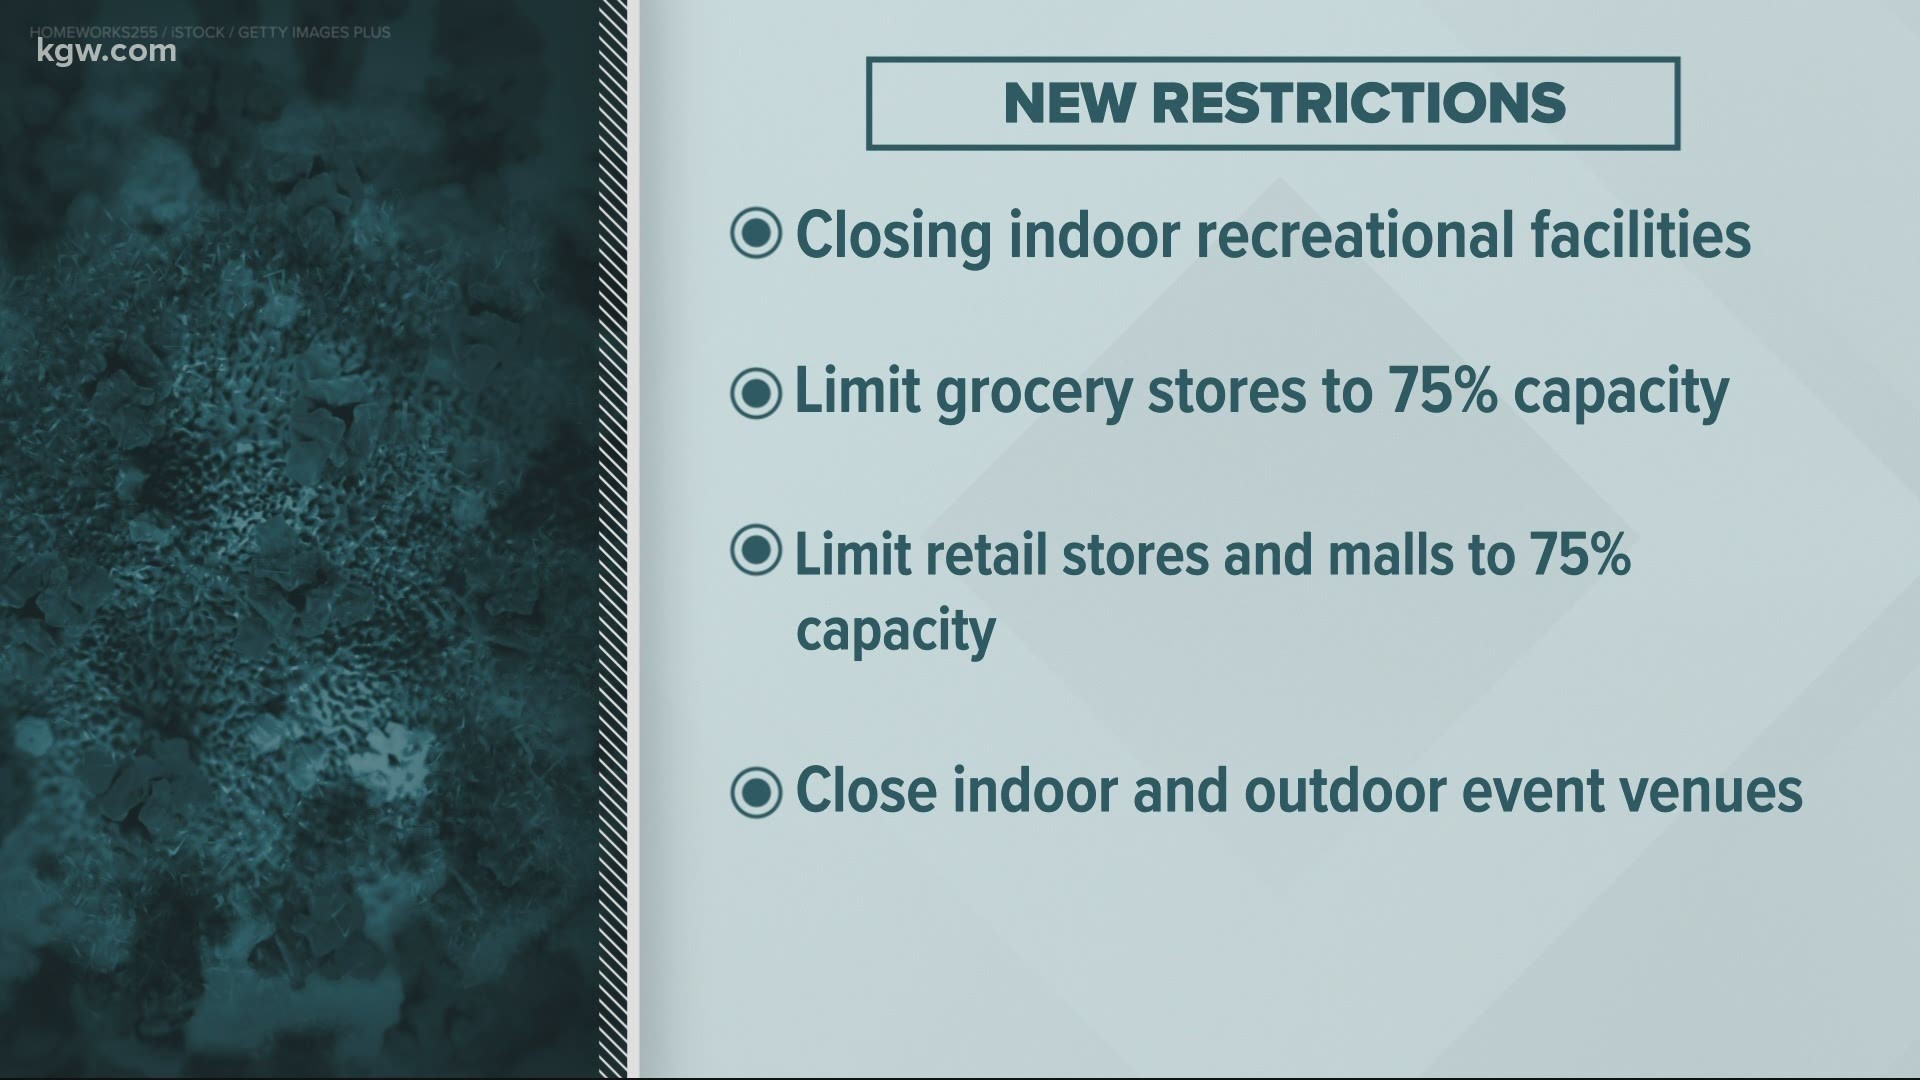 The new restrictions will limit restaurants and bars to takeout only, and recreational facilities and venues that host indoor or outdoor events will be closed.